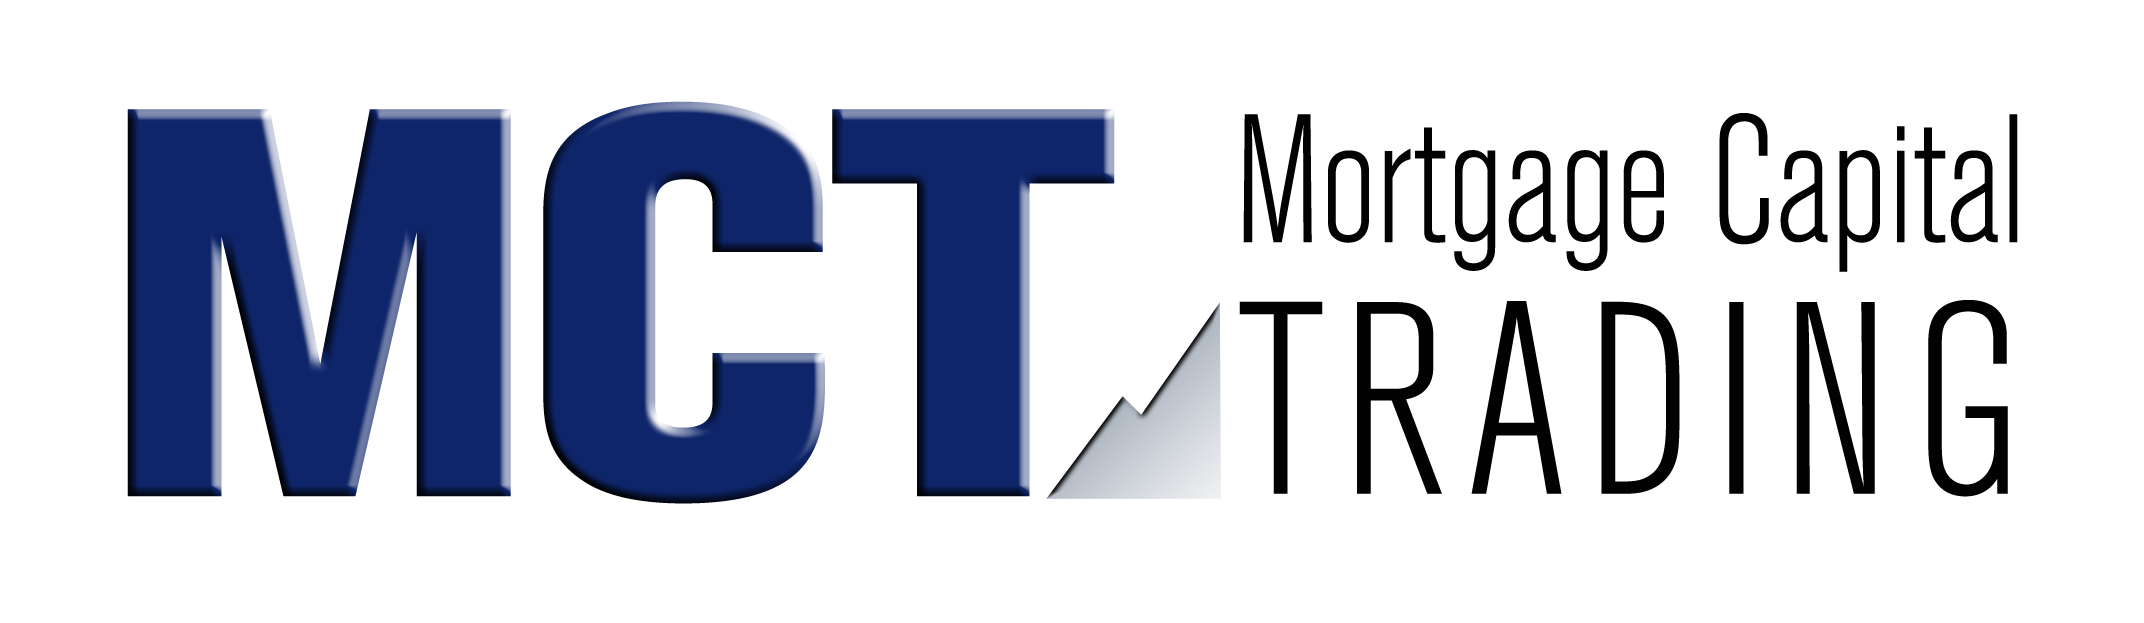 Mortgage Capital Trading (MCT) has announced that it has completed an integration between its secondary marketing solution and PCLender’s loan origination system (LOS)